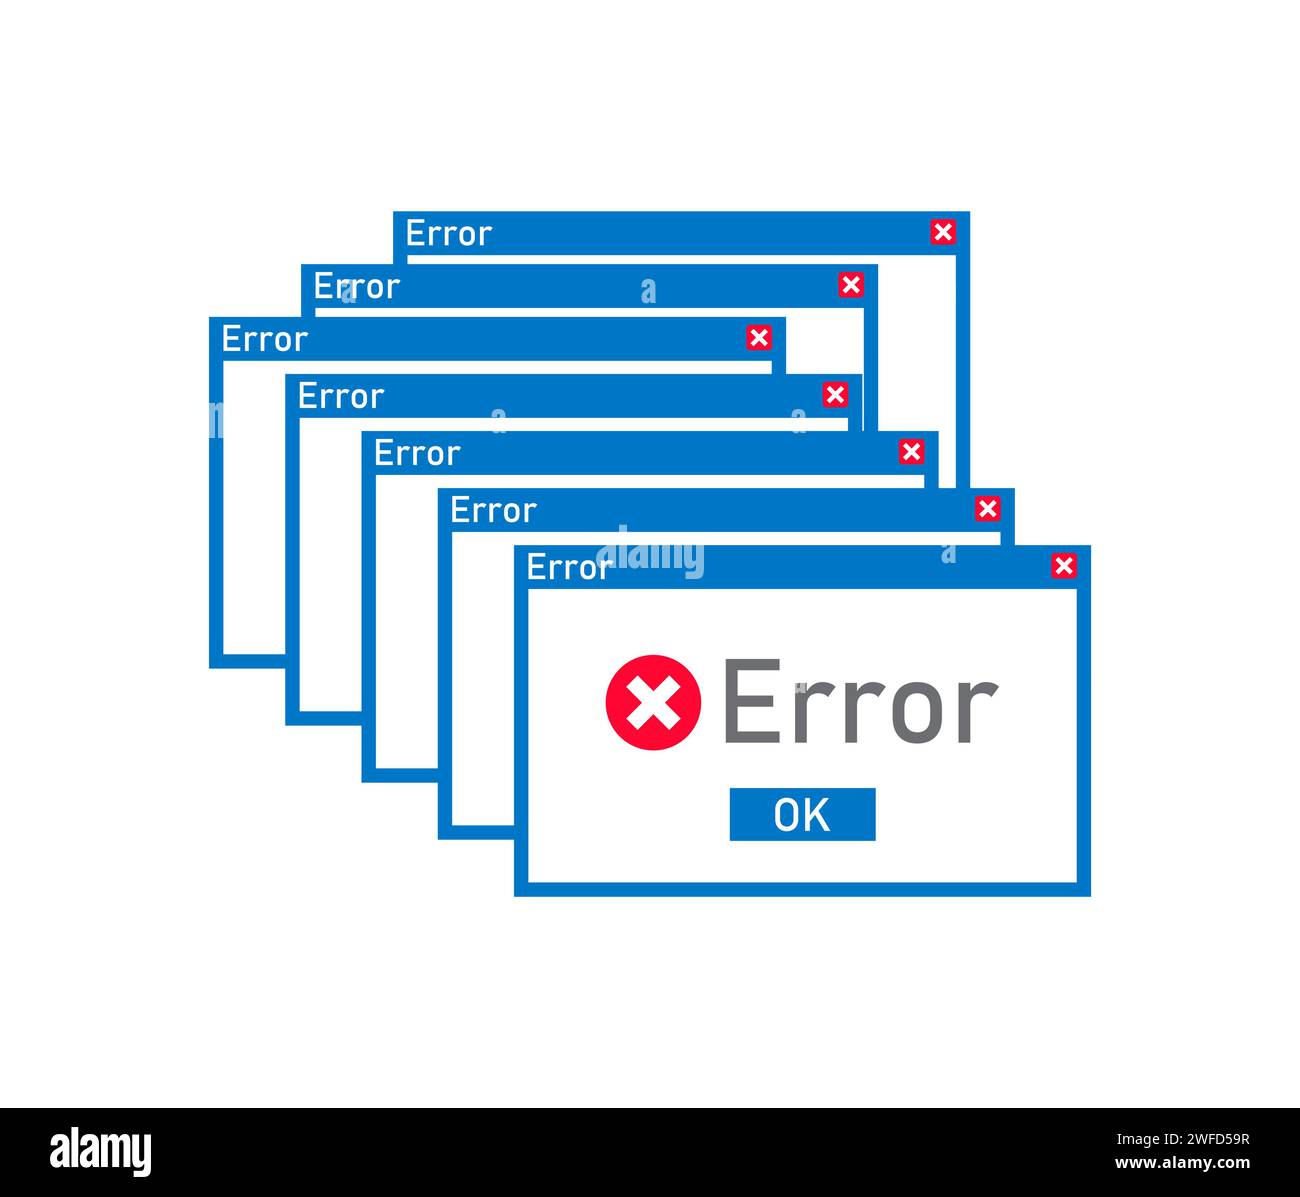 Many error messages. Computer interface. Alert message. Vector illustration. stock image. EPS 10. Stock Vector